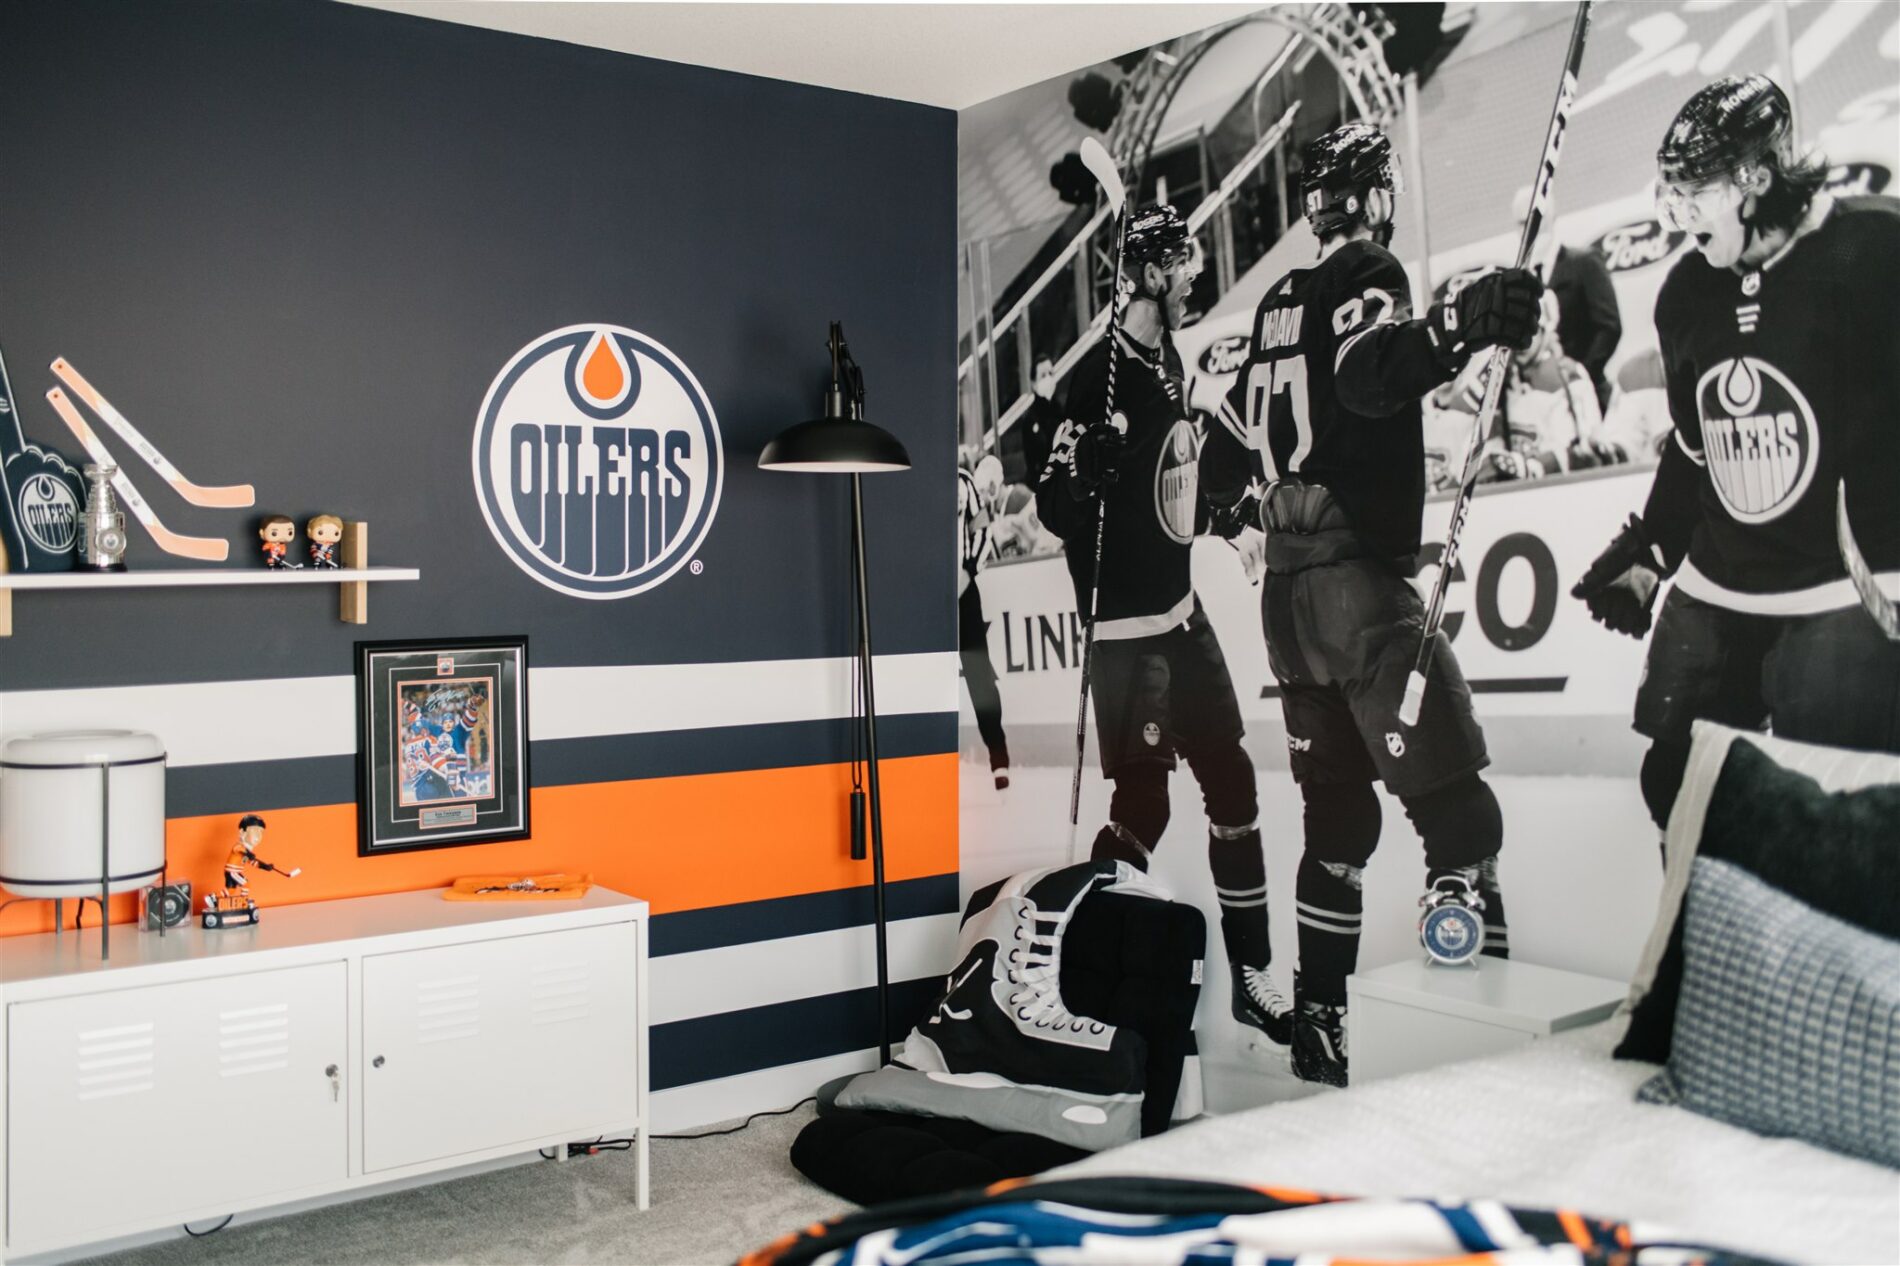 Fun Oilers bedroom with large mural of team celebrating, striped blue, orange and white feature wall with Oilers logo and hockey accesories